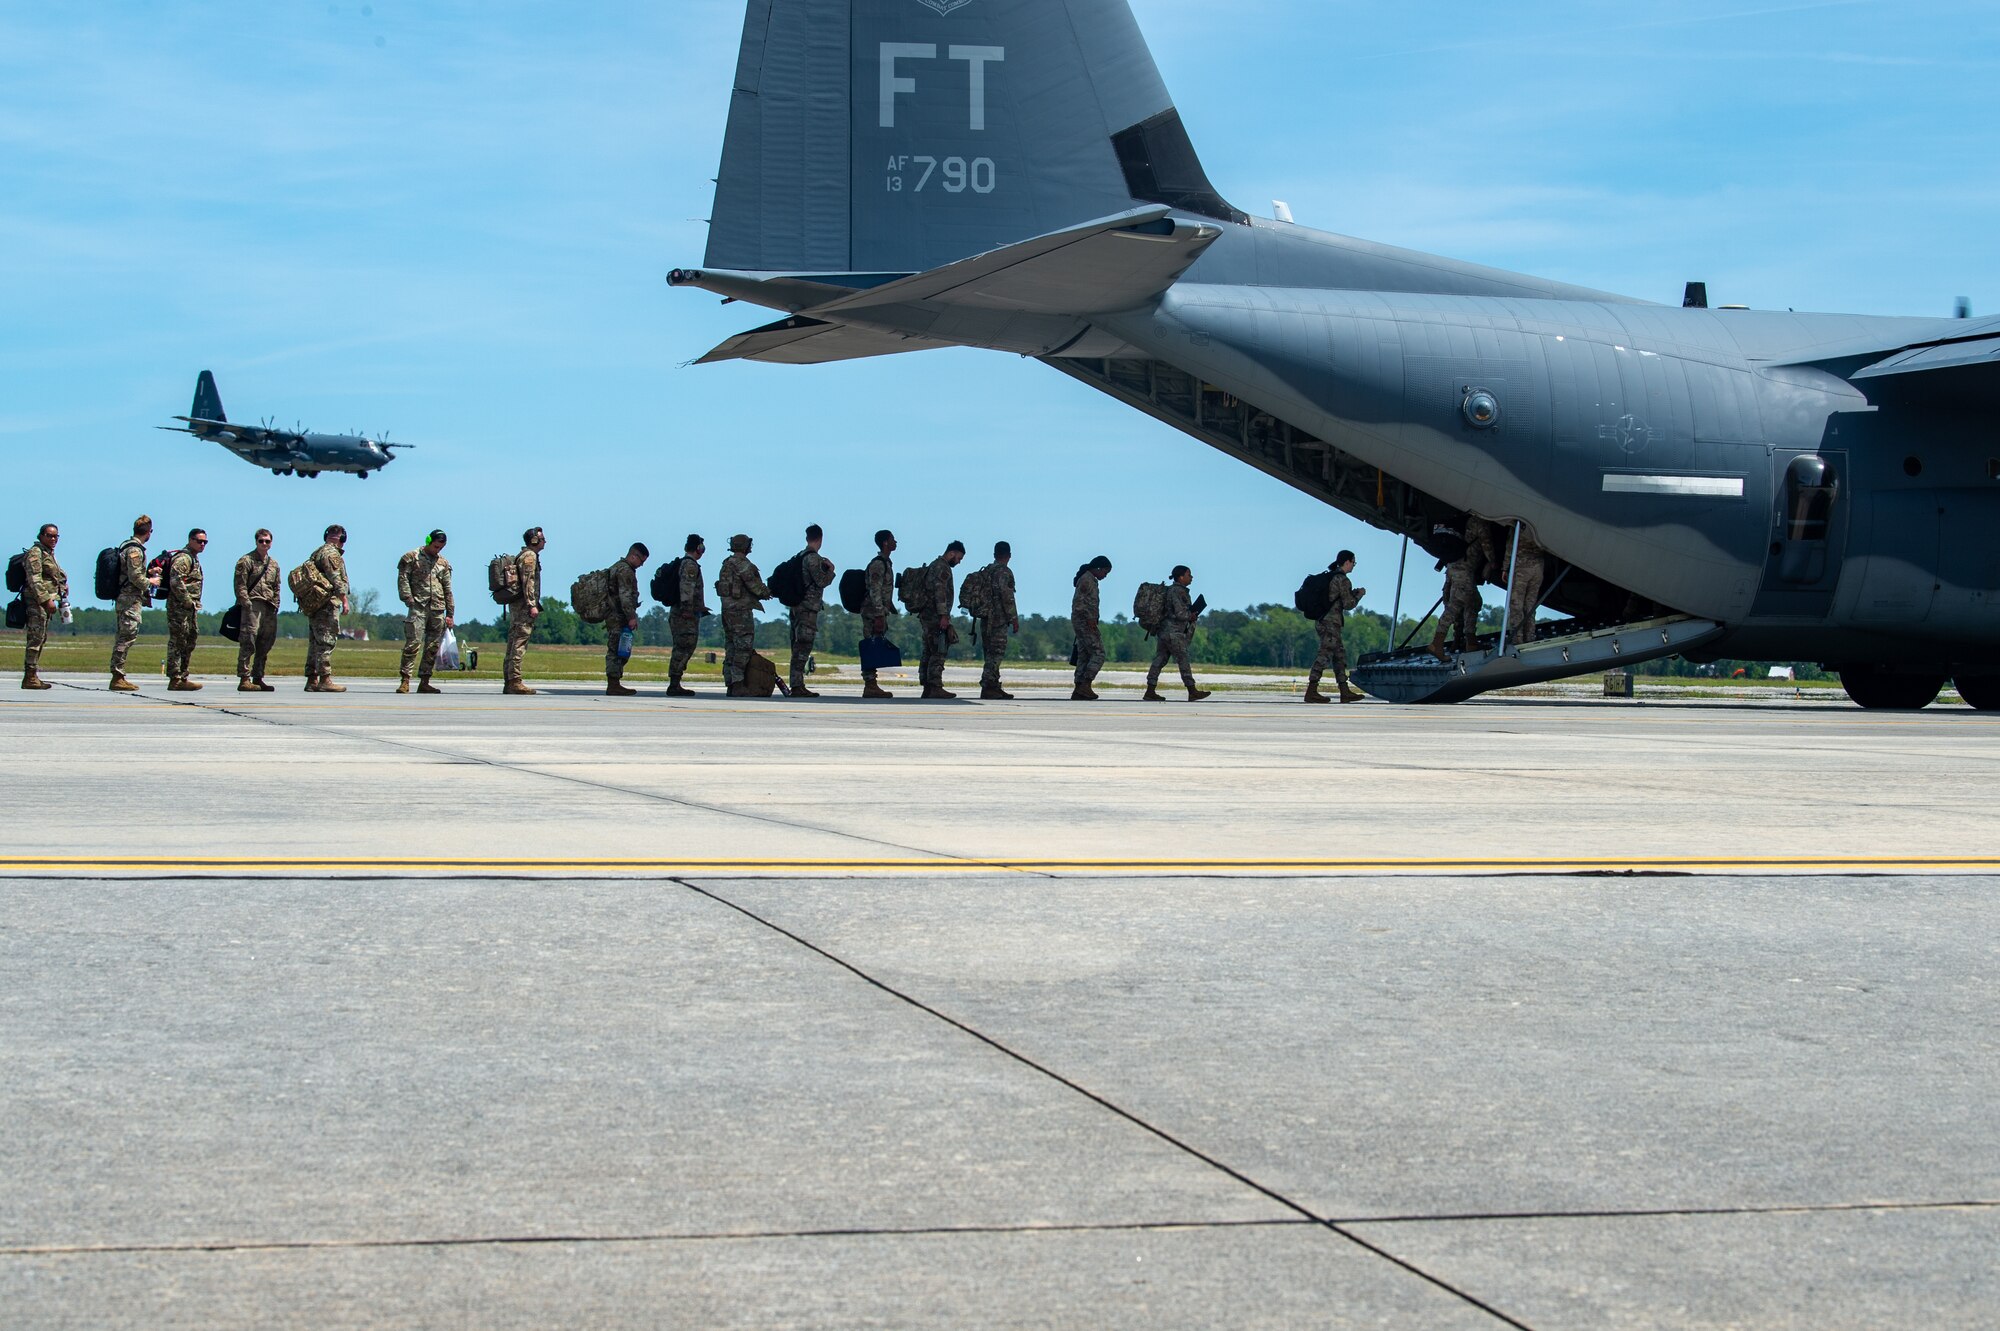 U.S. Air Force Airmen load an HC-130J Combat King II assigned to the 71st Rescue Squadron in support of Exercise Ready Tiger 24-1 at Moody Air Force Base, Georgia, April 8, 2024.  The 71st Rescue Squadron played a vital role in the exercise as they transported personnel and equipment to the various exercise locations.  During Ready Tiger 24-1, the 23rd Wing will be evaluated on the integration of Air Force Force Generation principles such as Agile Combat Employment, integrated combat turns, forward aerial refueling points, multi-capable Airmen, and combat search and rescue capabilities. (U.S. Air Force photo by Airman 1st Class Iain Stanley)